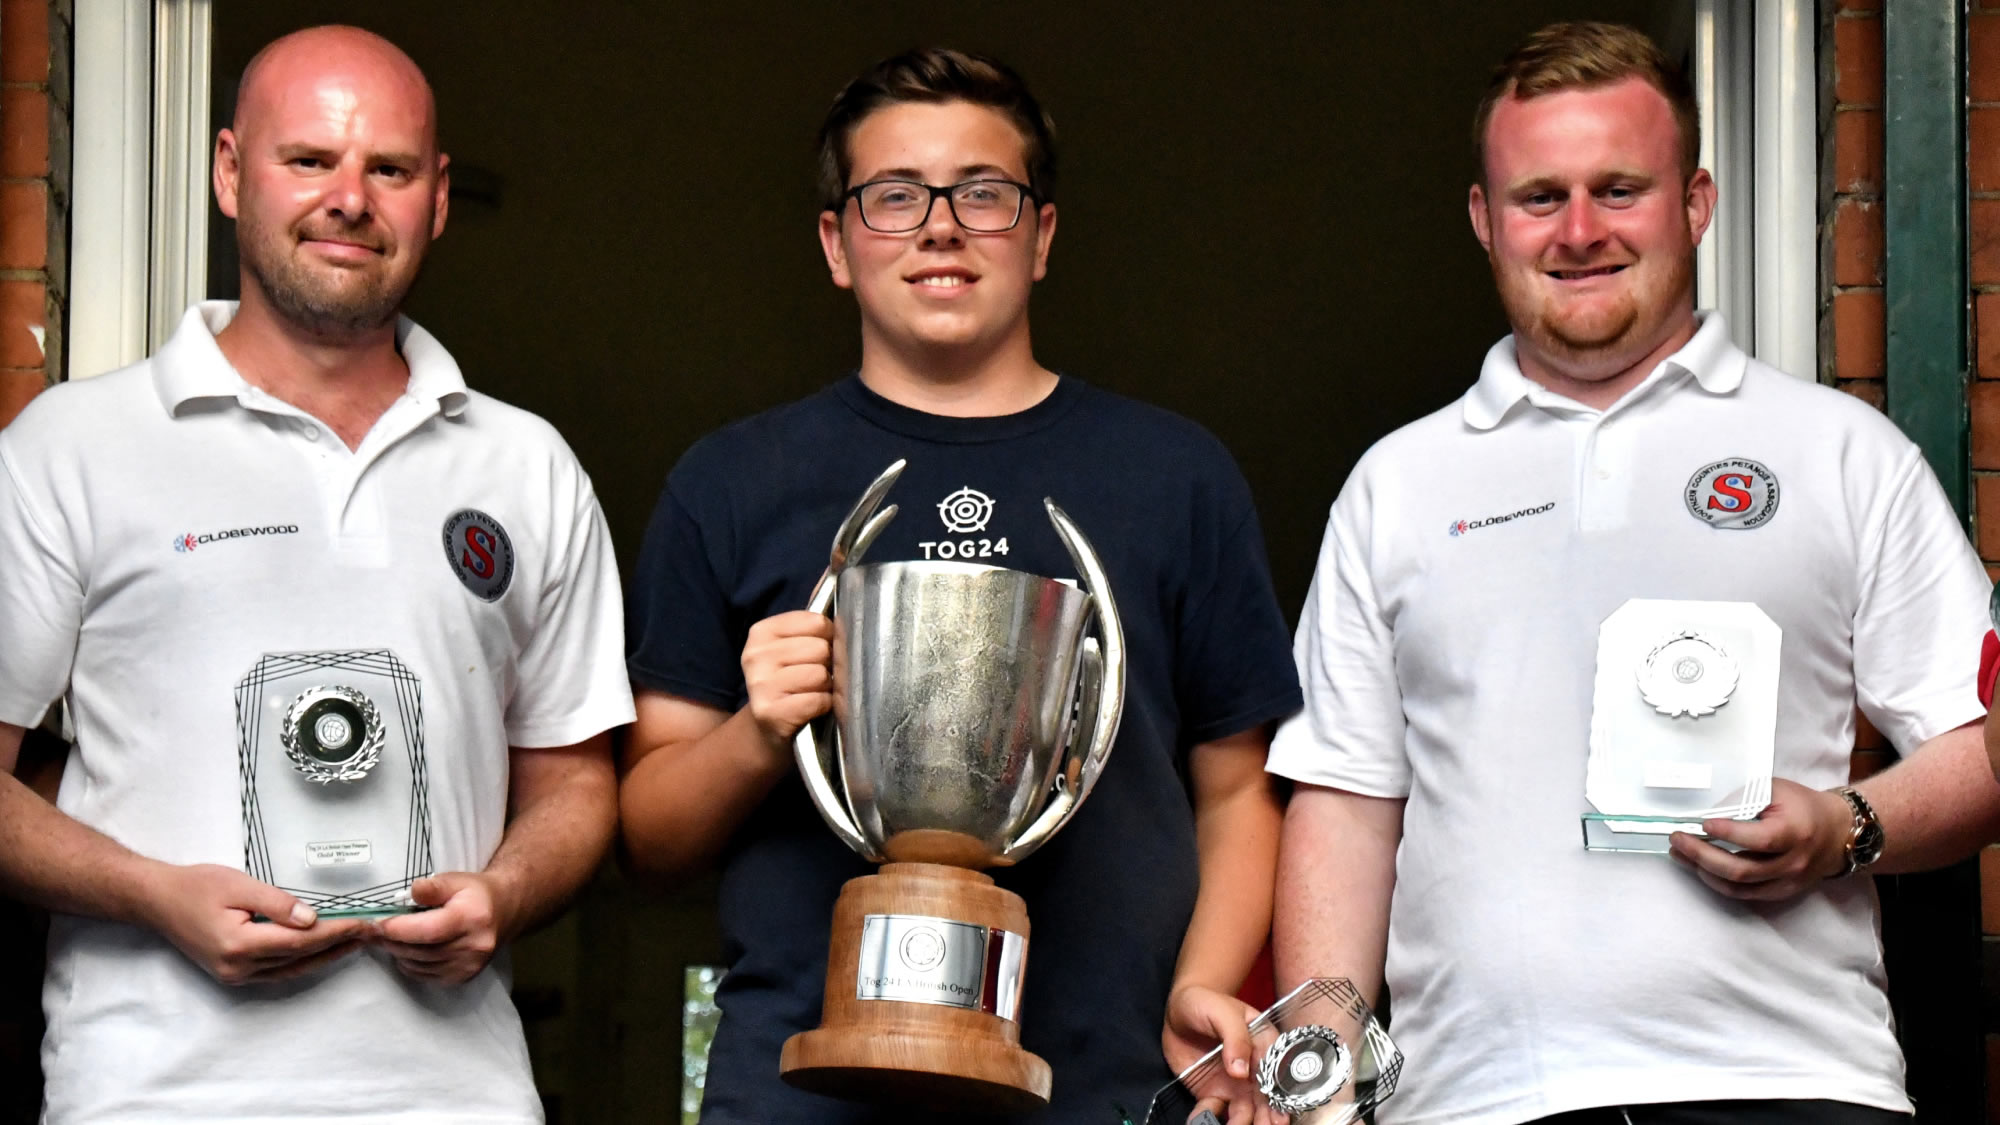 Stephen Daykin, Jamie Brooks and Callum Lombard lifting the trophy at the TOG24 La British Open